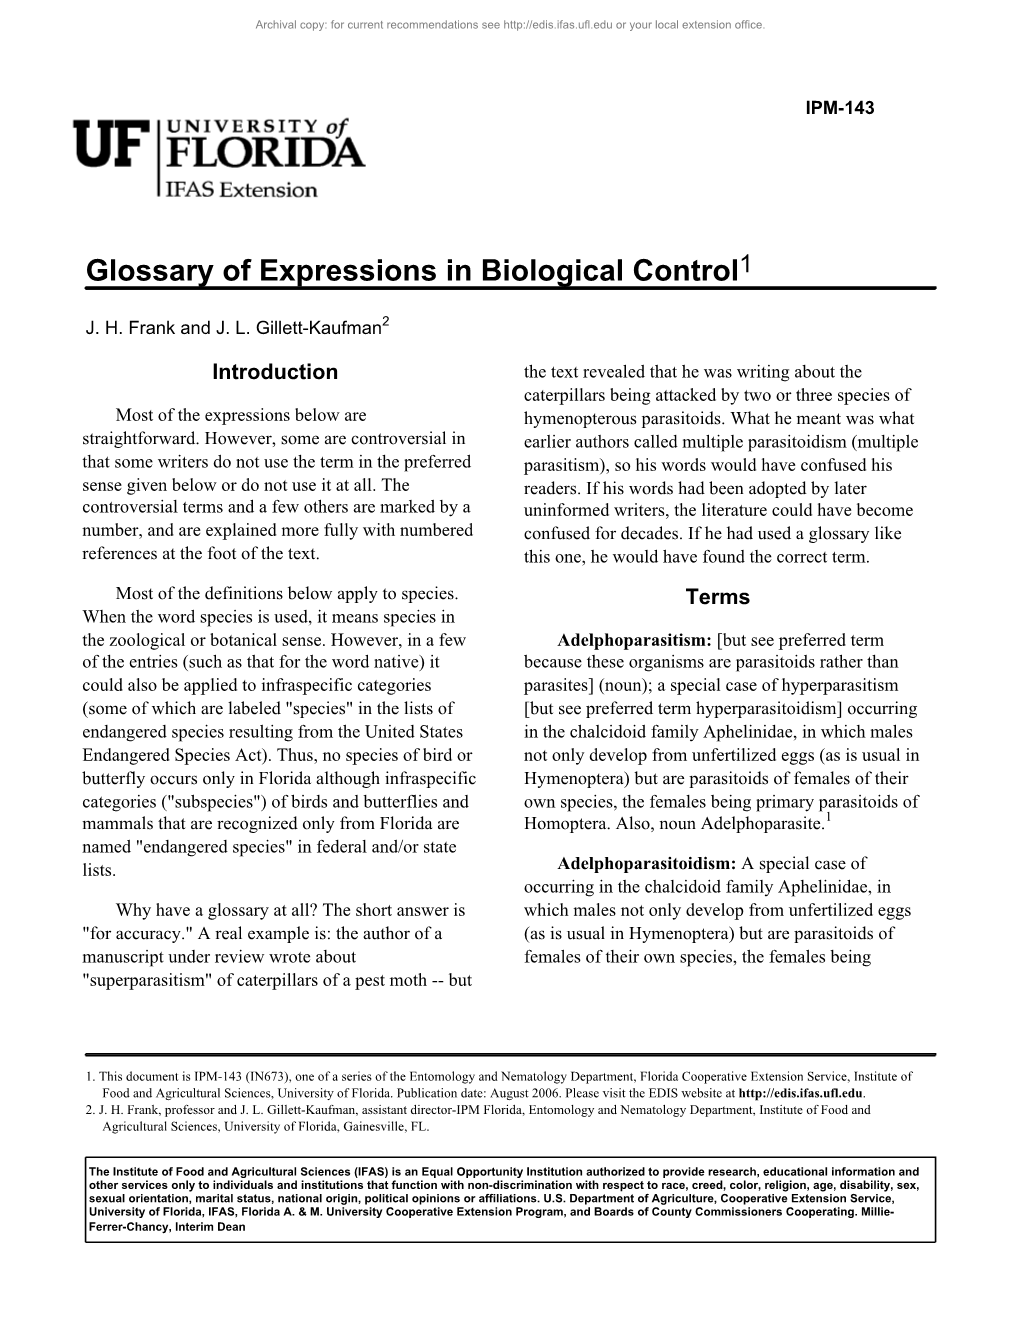 Glossary of Expressions in Biological Control1